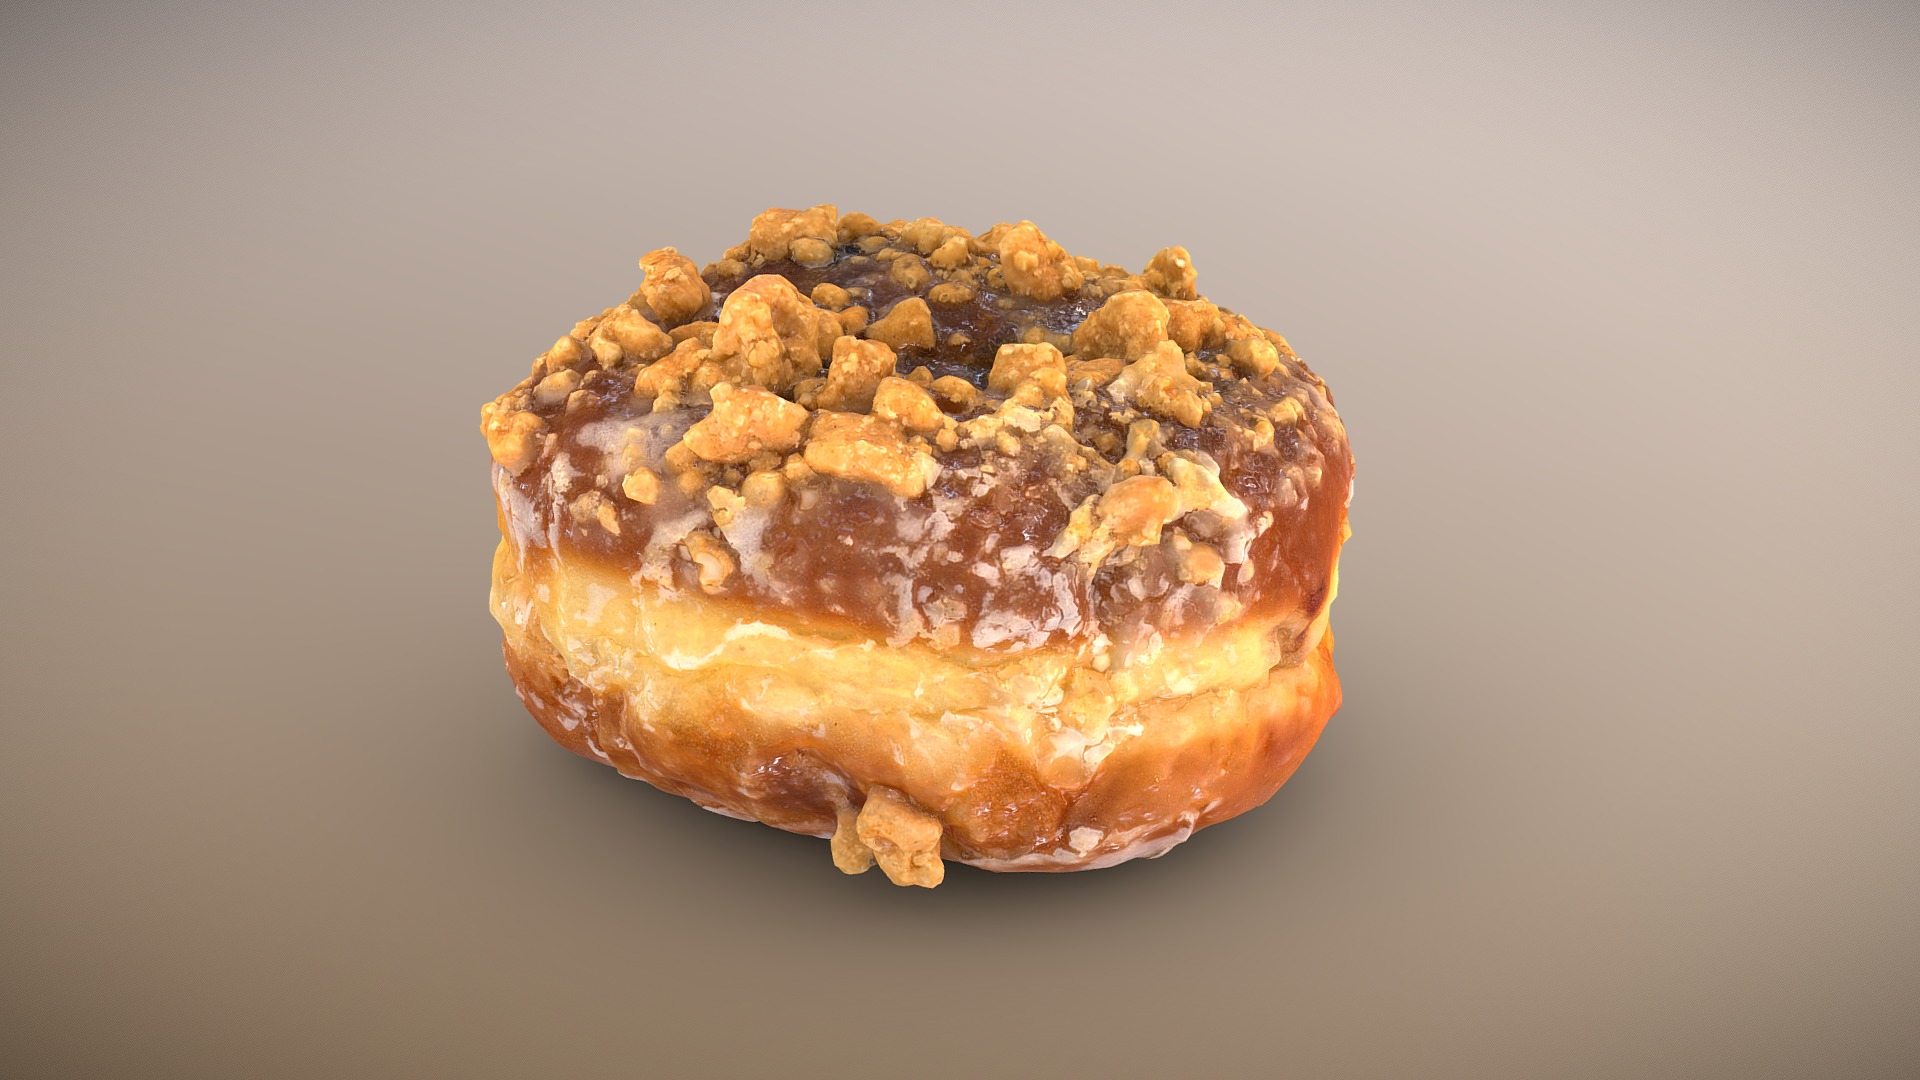 3D model Doughnut Plant Crumble Doughseed - This is a 3D model of the Doughnut Plant Crumble Doughseed. The 3D model is about a close up of a pine cone.